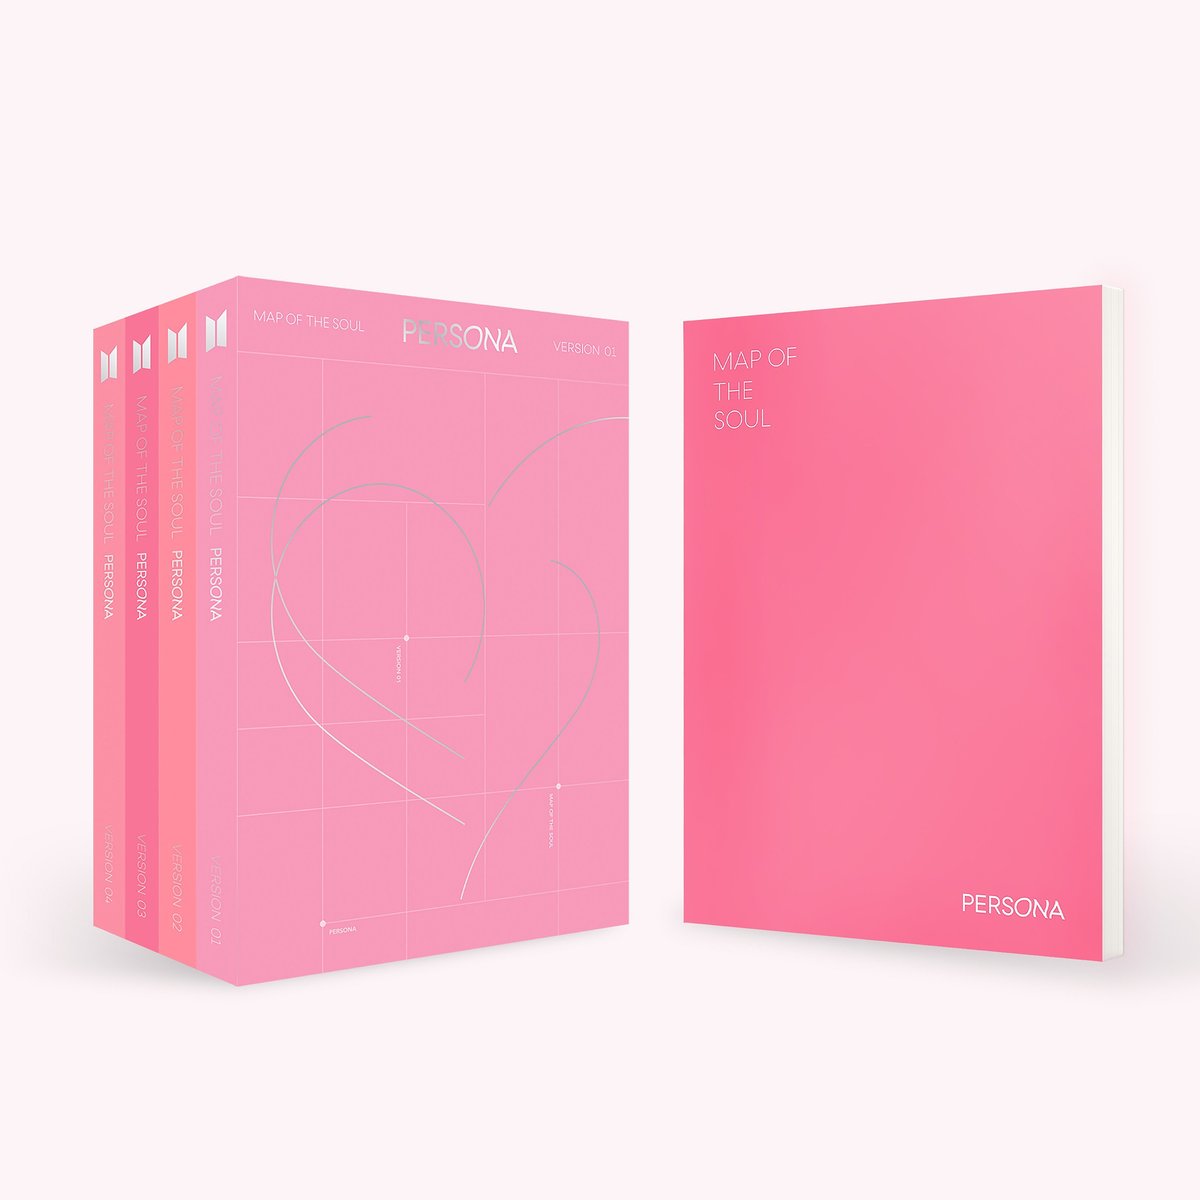 BTS - MAP OF THE SOUL : PERSONA